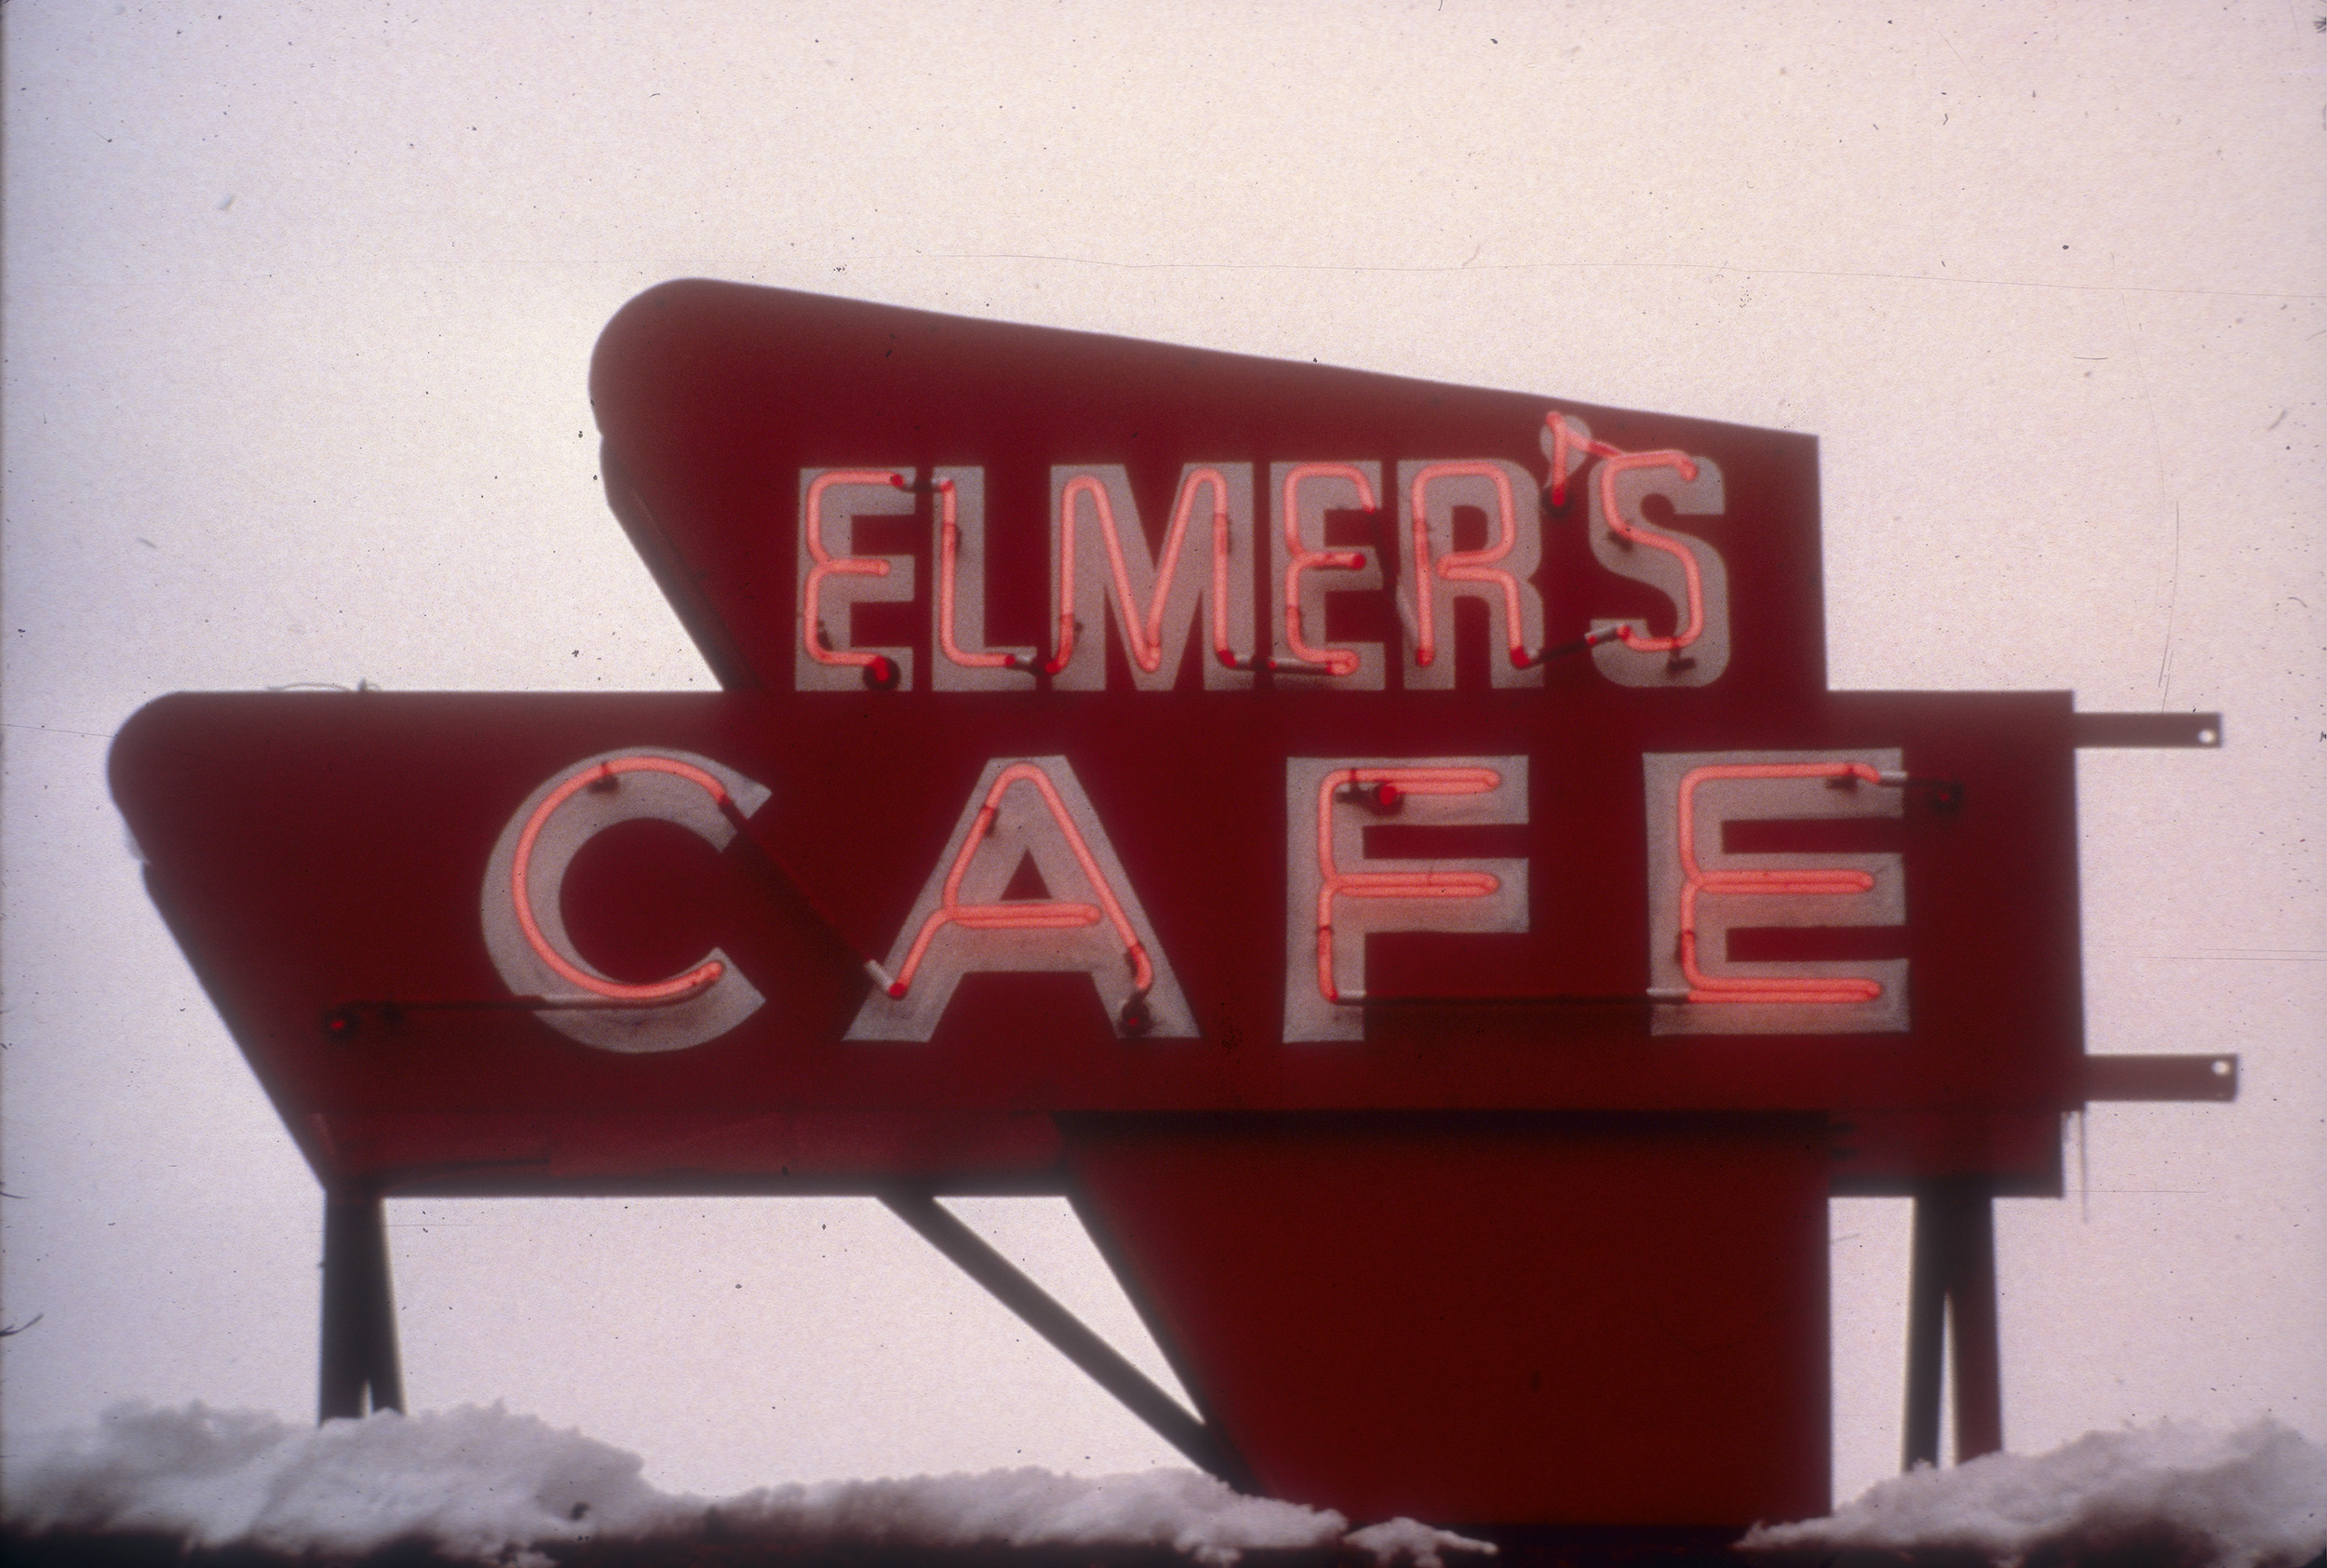 Slide of the neon sign for Elmer's Cafe, Washoe County, Nevada, 1986